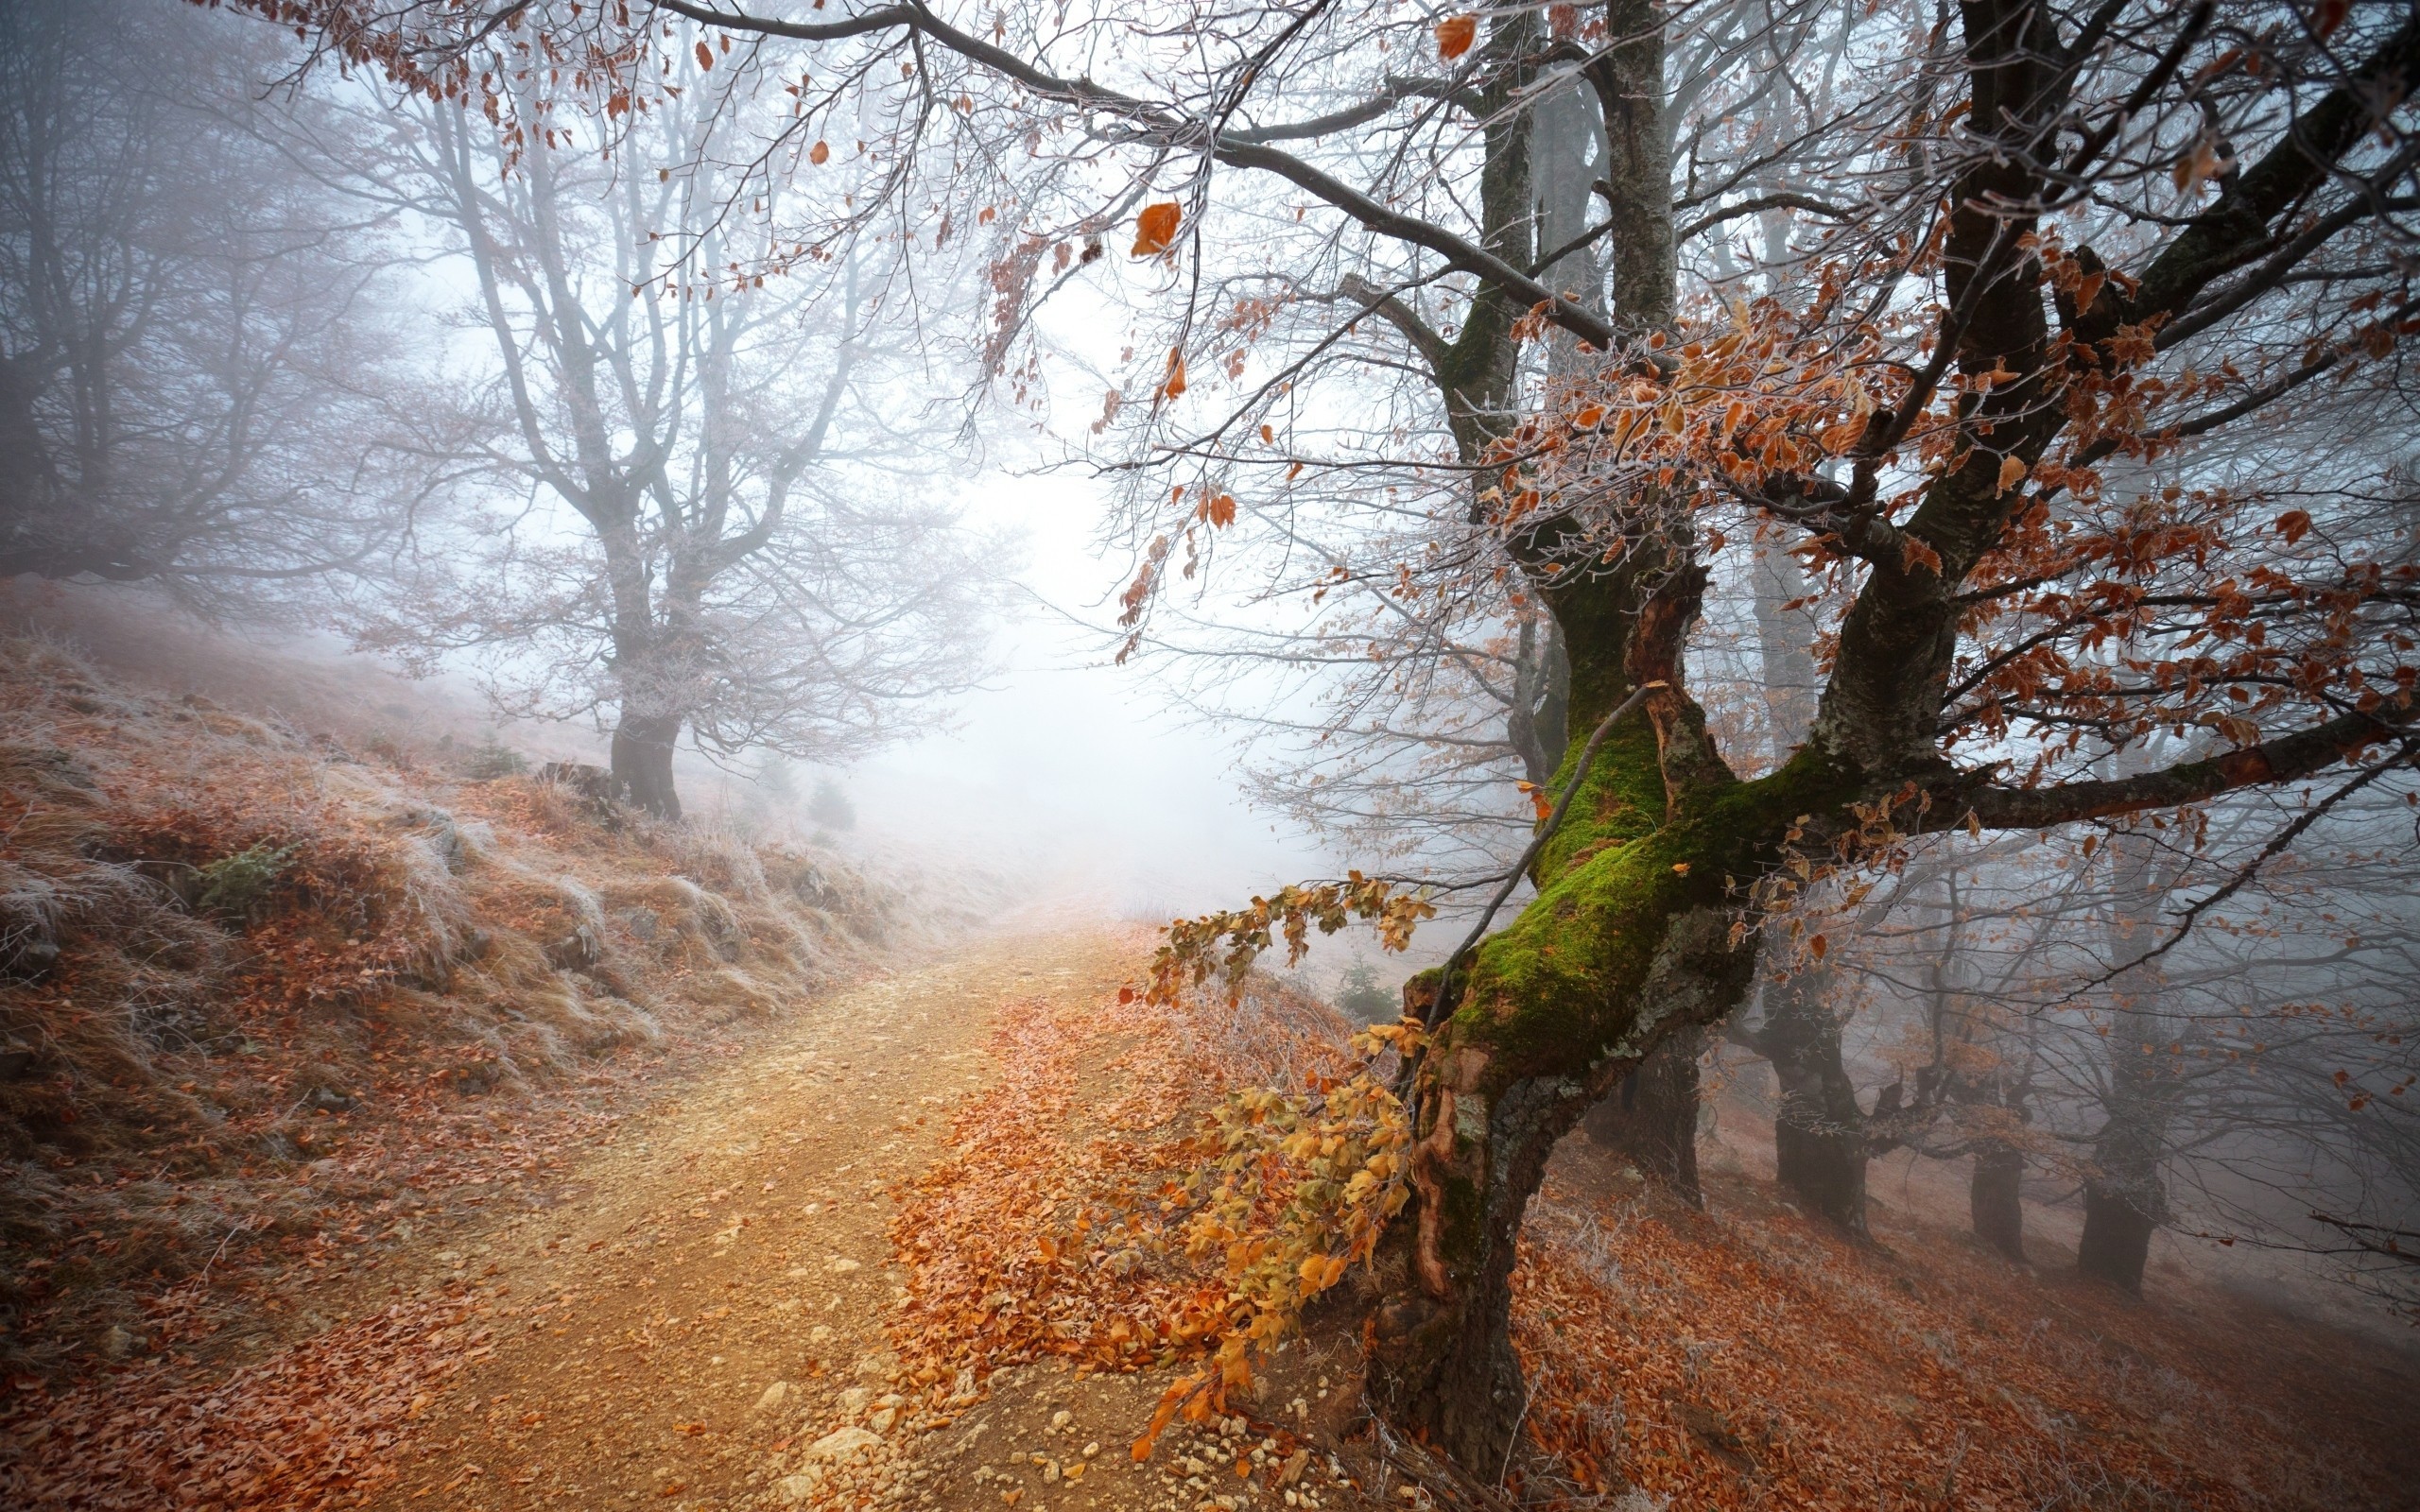 General 2560x1600 nature forest trees path mist dirt road